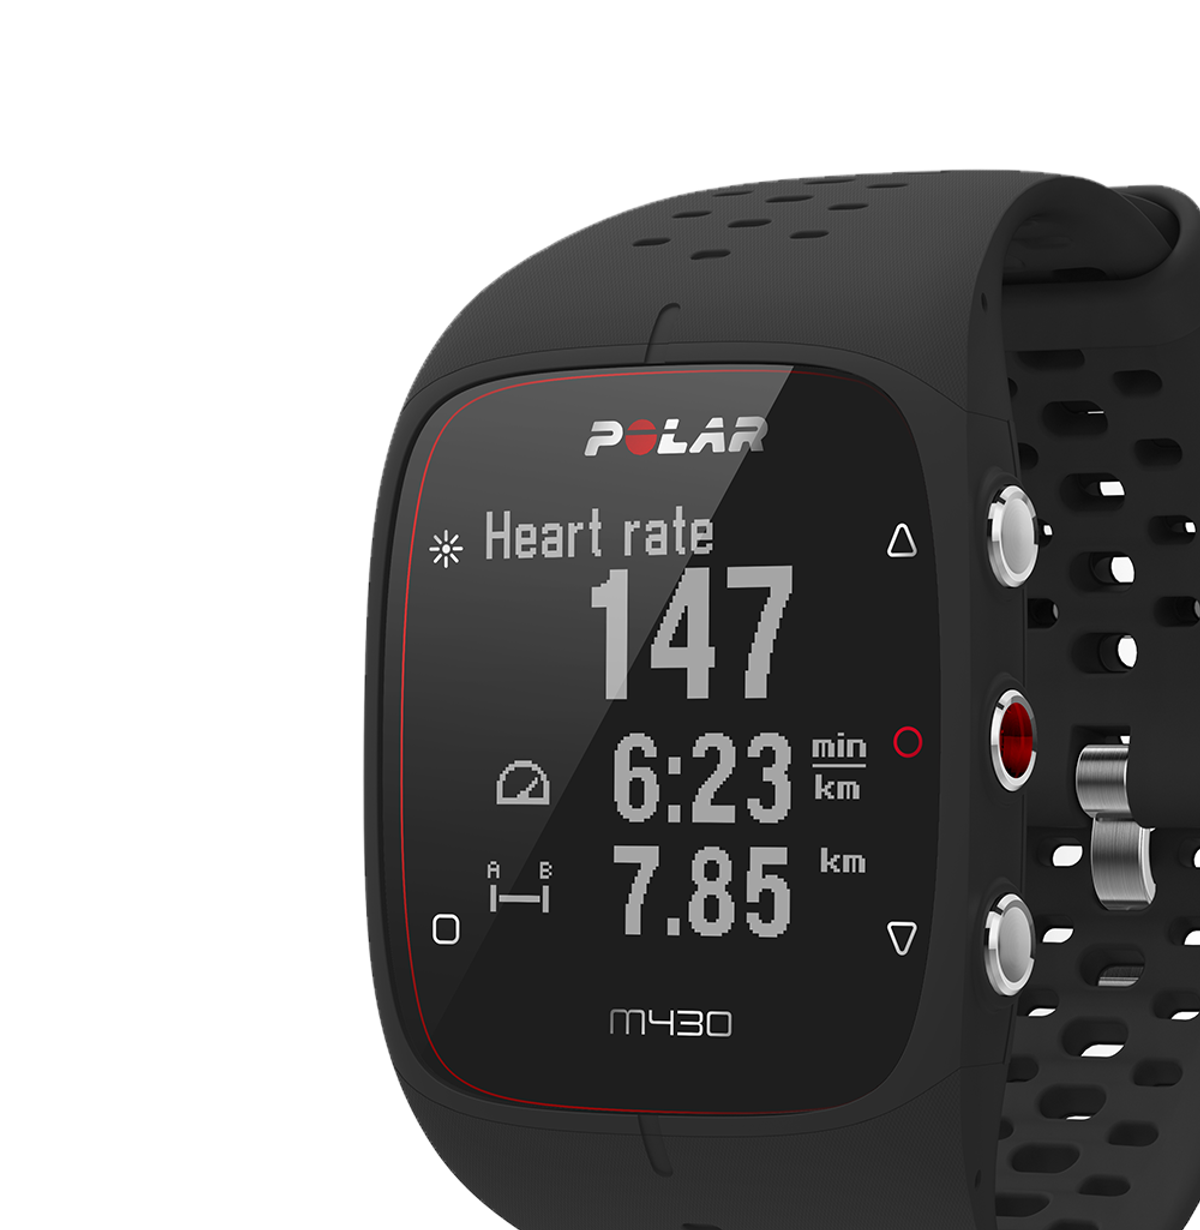 M430 | Running watch with GPS tracker and pace USA